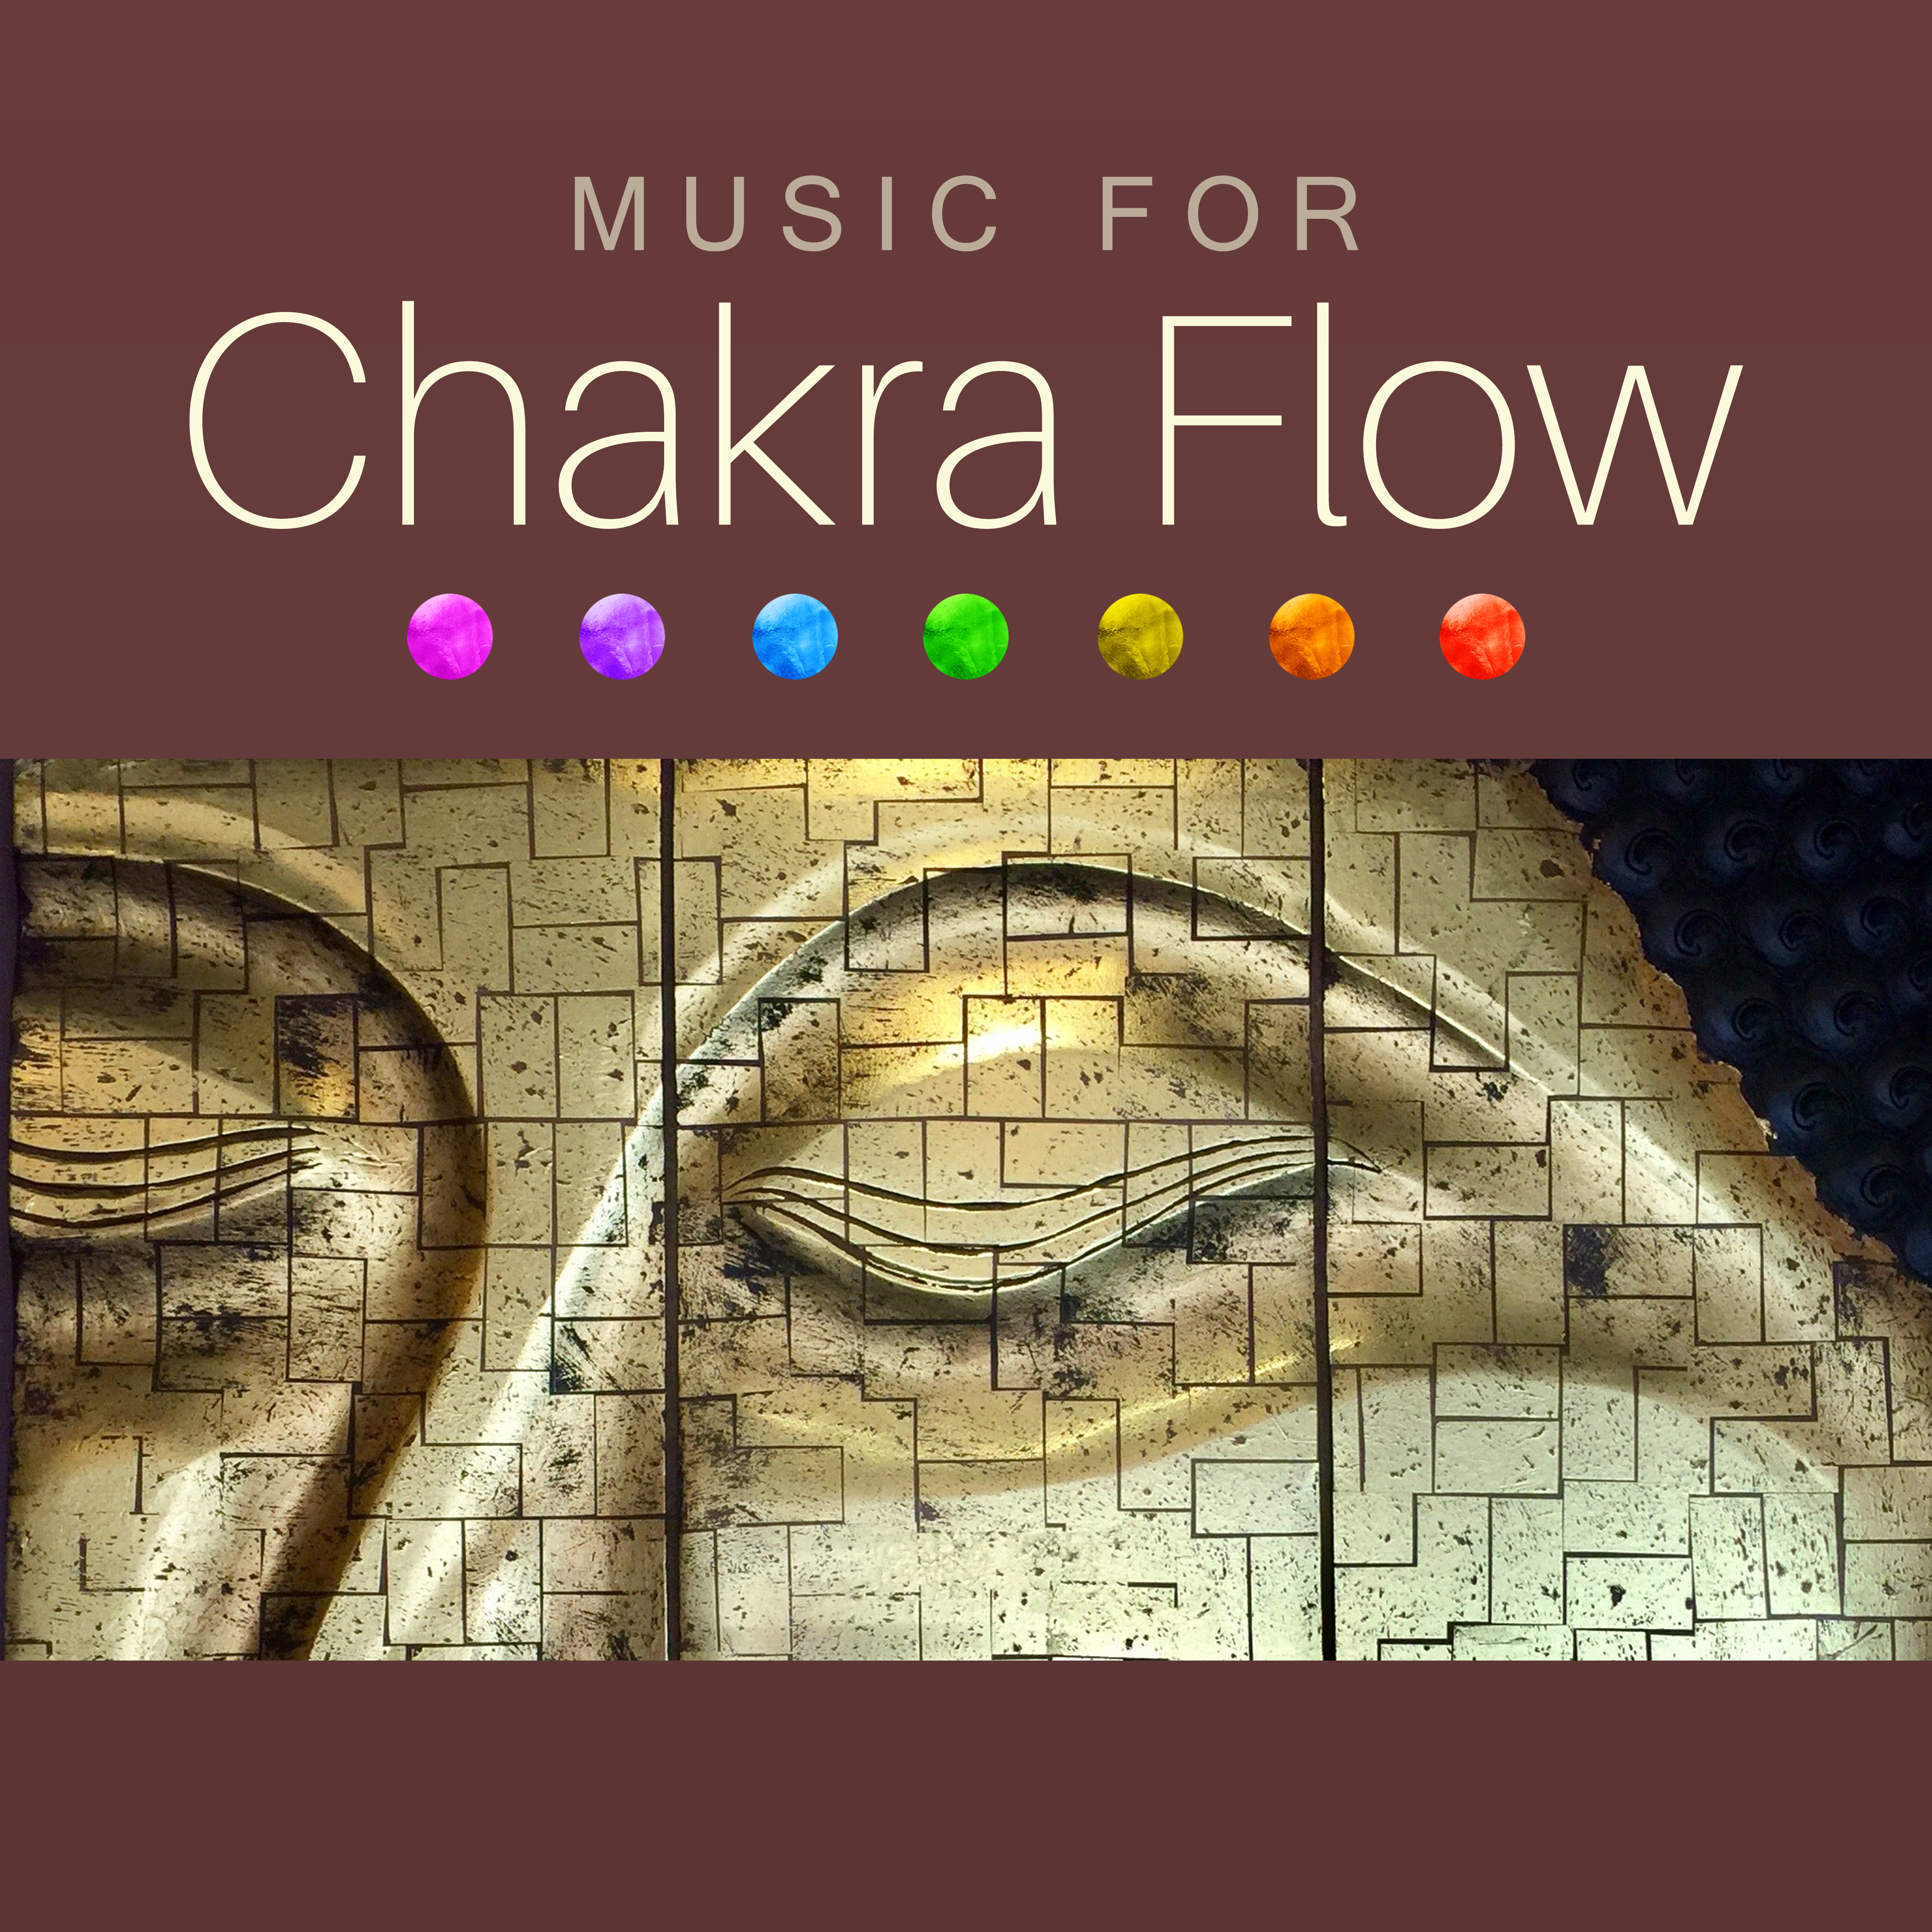 Music for Chakra Flow  Meditation Sounds for Inner Peace, Music to Rest, Soul Journey, Spiritual Sounds